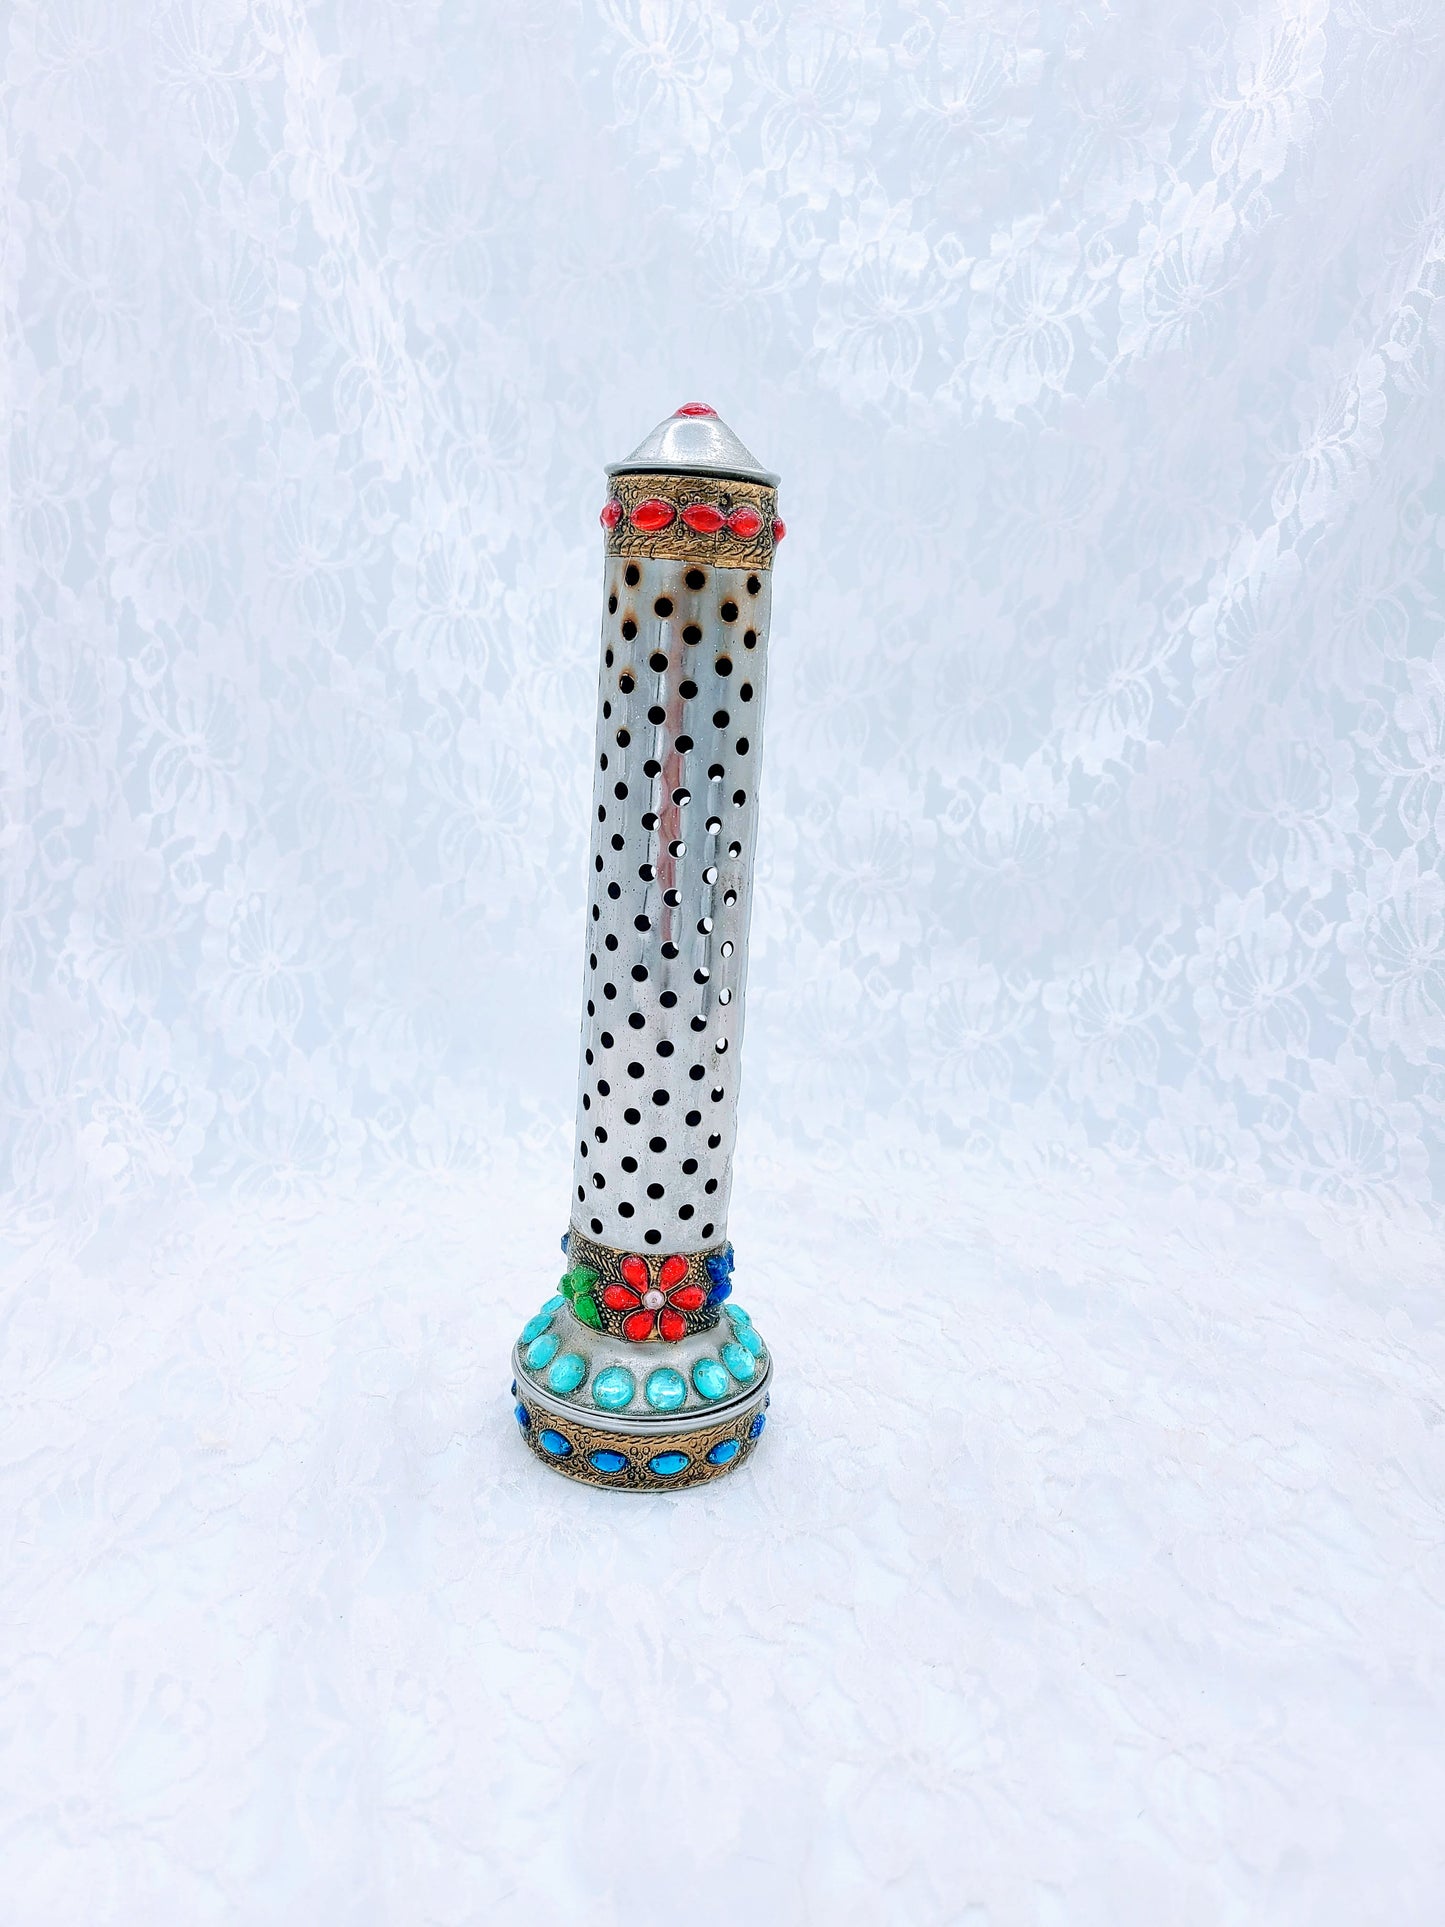 Bejeweled Vintage India Incense Burner Tower ~ Upright Tower ~ Burns Incense, Contains The Ash and Dust from Burning Incense